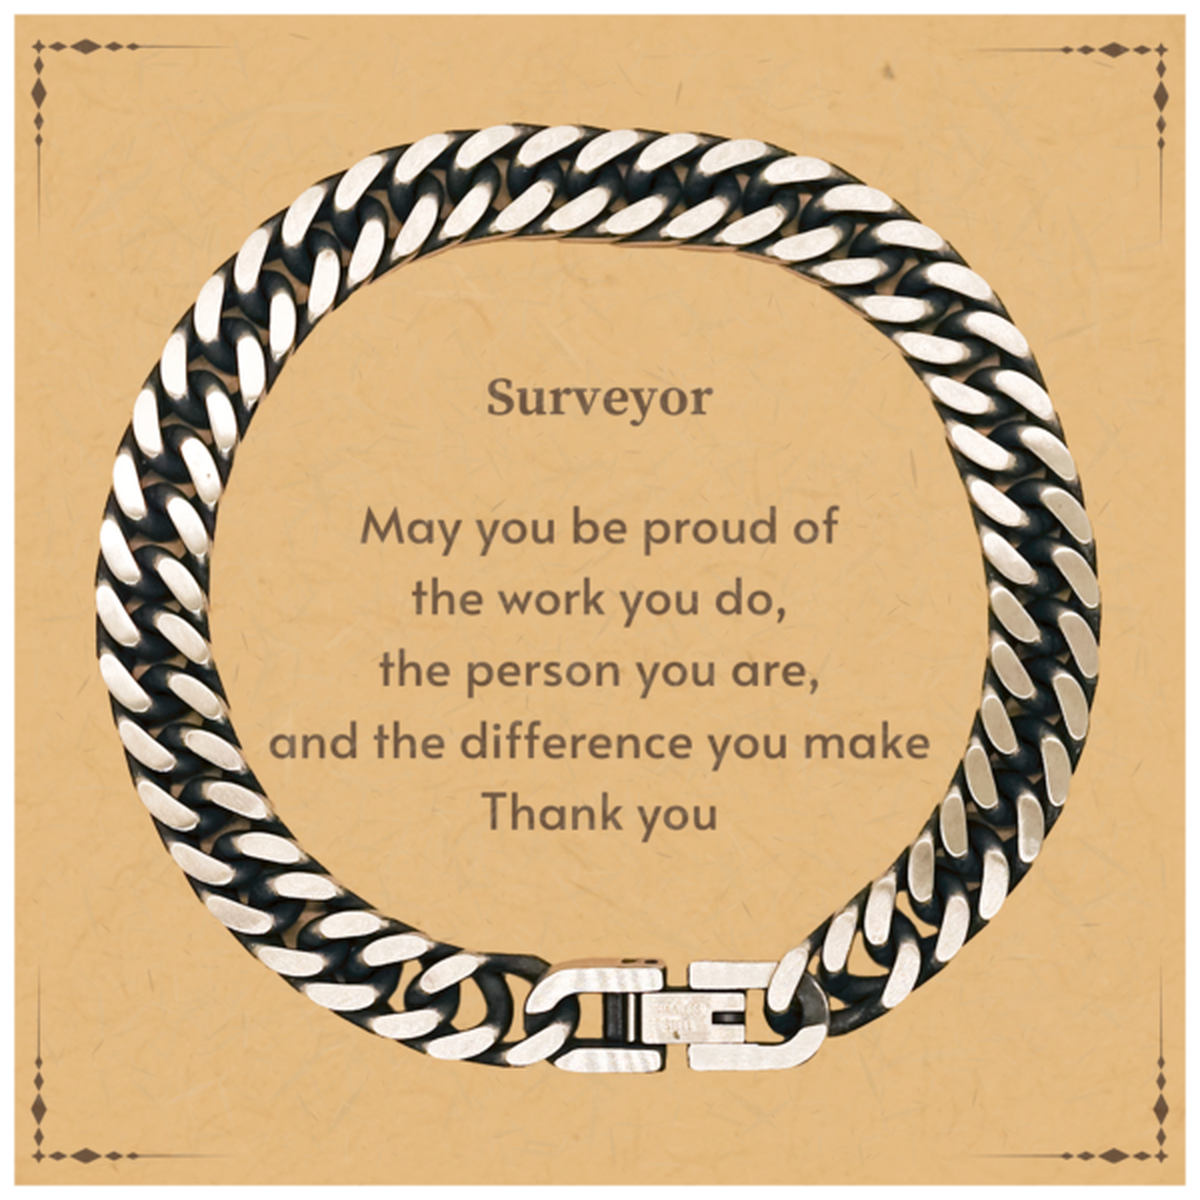 Heartwarming Cuban Link Chain Bracelet Retirement Coworkers Gifts for Surveyor, Surveyor May You be proud of the work you do, the person you are Gifts for Boss Men Women Friends